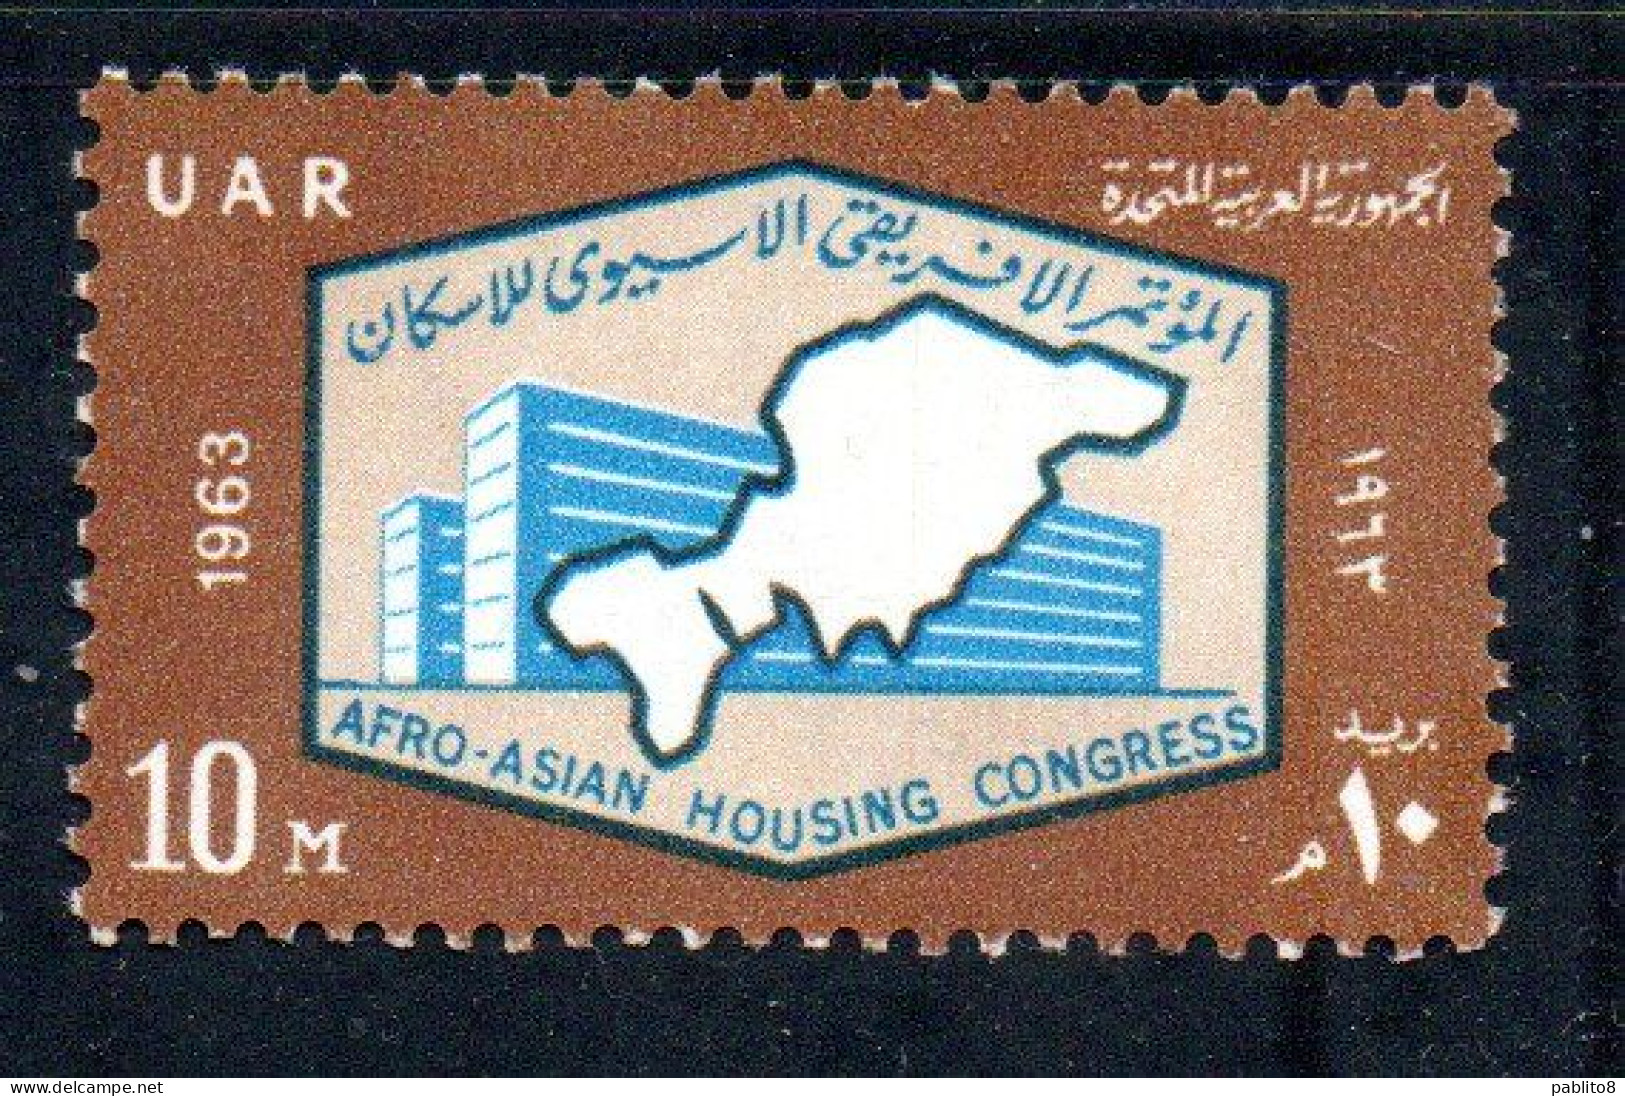 UAR EGYPT EGITTO 1963 AFRO-ASIAN HOUSING CONGRESS MODERN BUILDING AND MAP 10m MNH - Unused Stamps